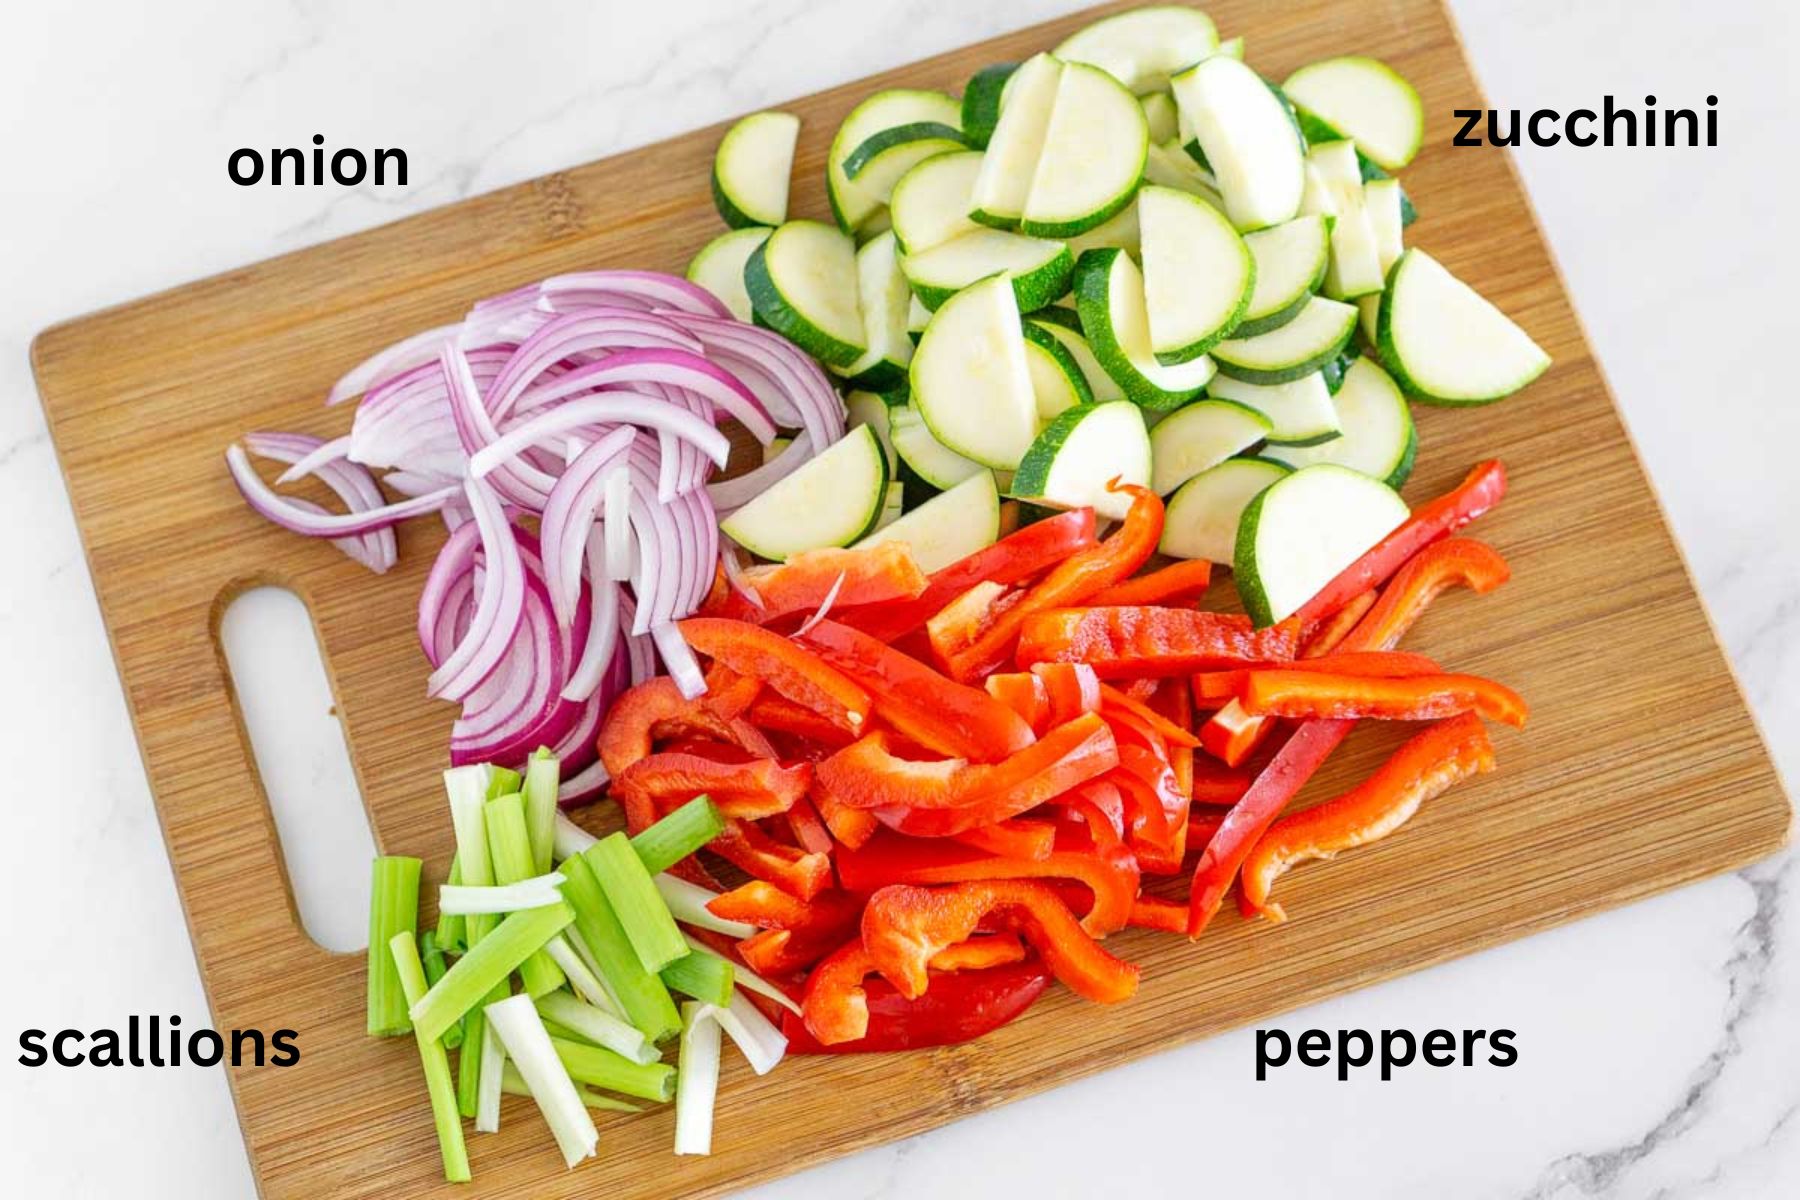 Sliced peppers, onion, zucchini, and scallions on a cutting board.